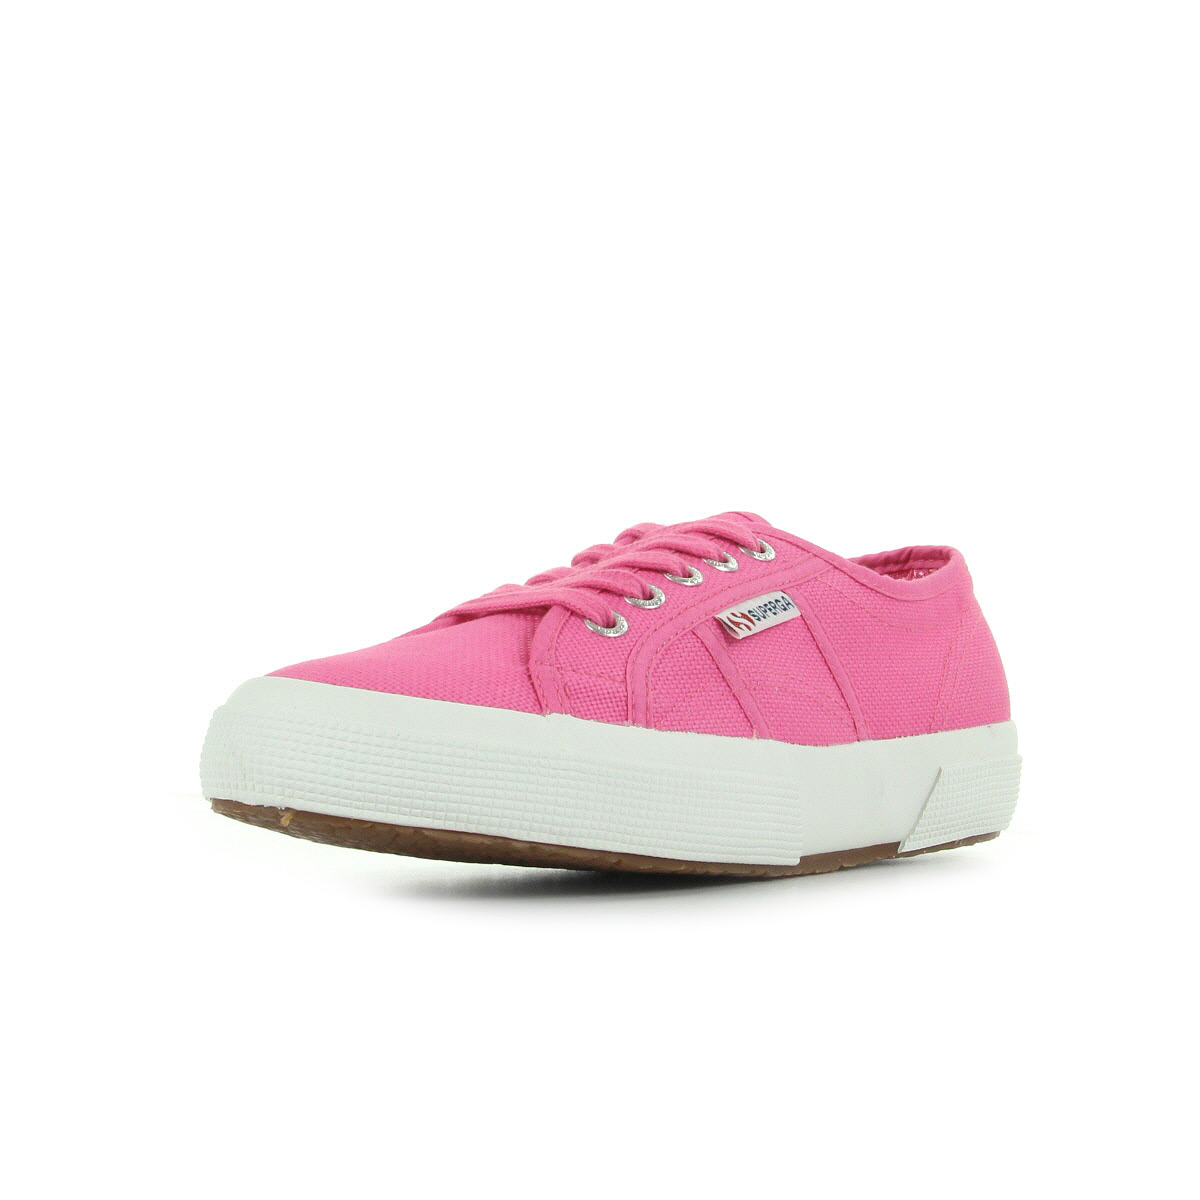 Chaussures Baskets Superga femme 2750 cotu classic taille Rose Textile